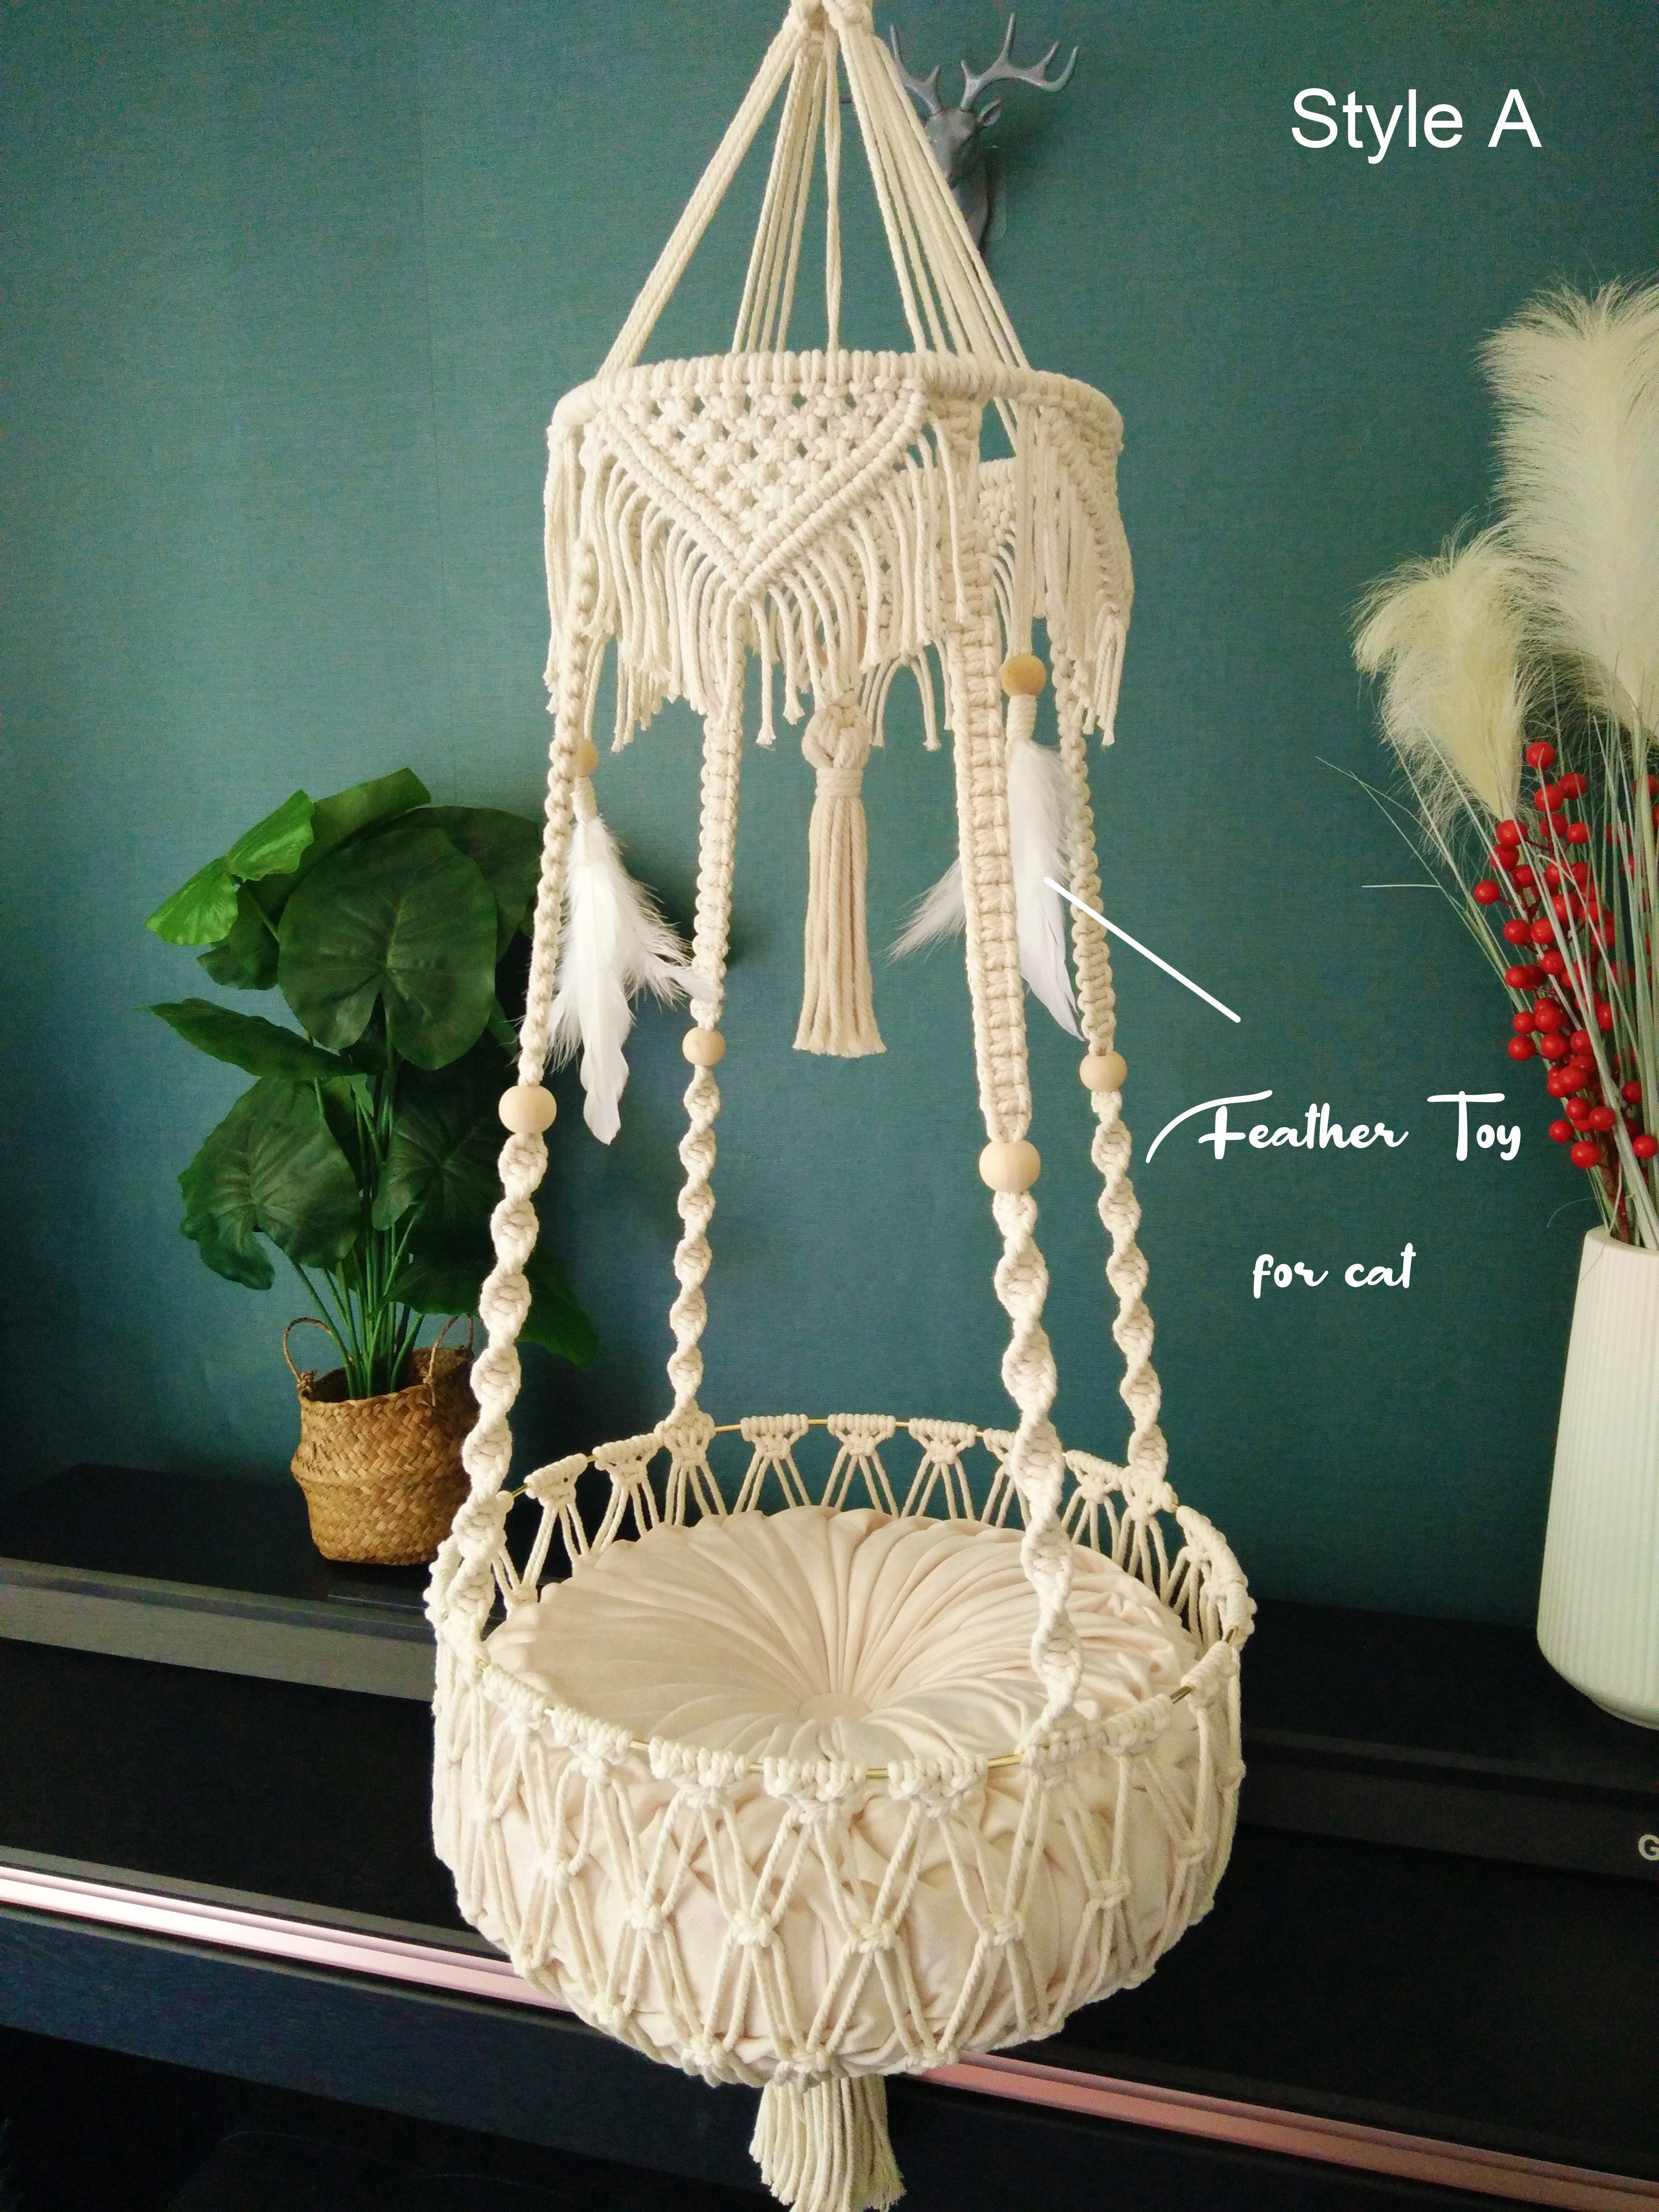 Personalized Macrame Cat Hammock for Cats,Hanging pet bed basket,Hand woven cat swing bed ,boho home decor-Gift choice